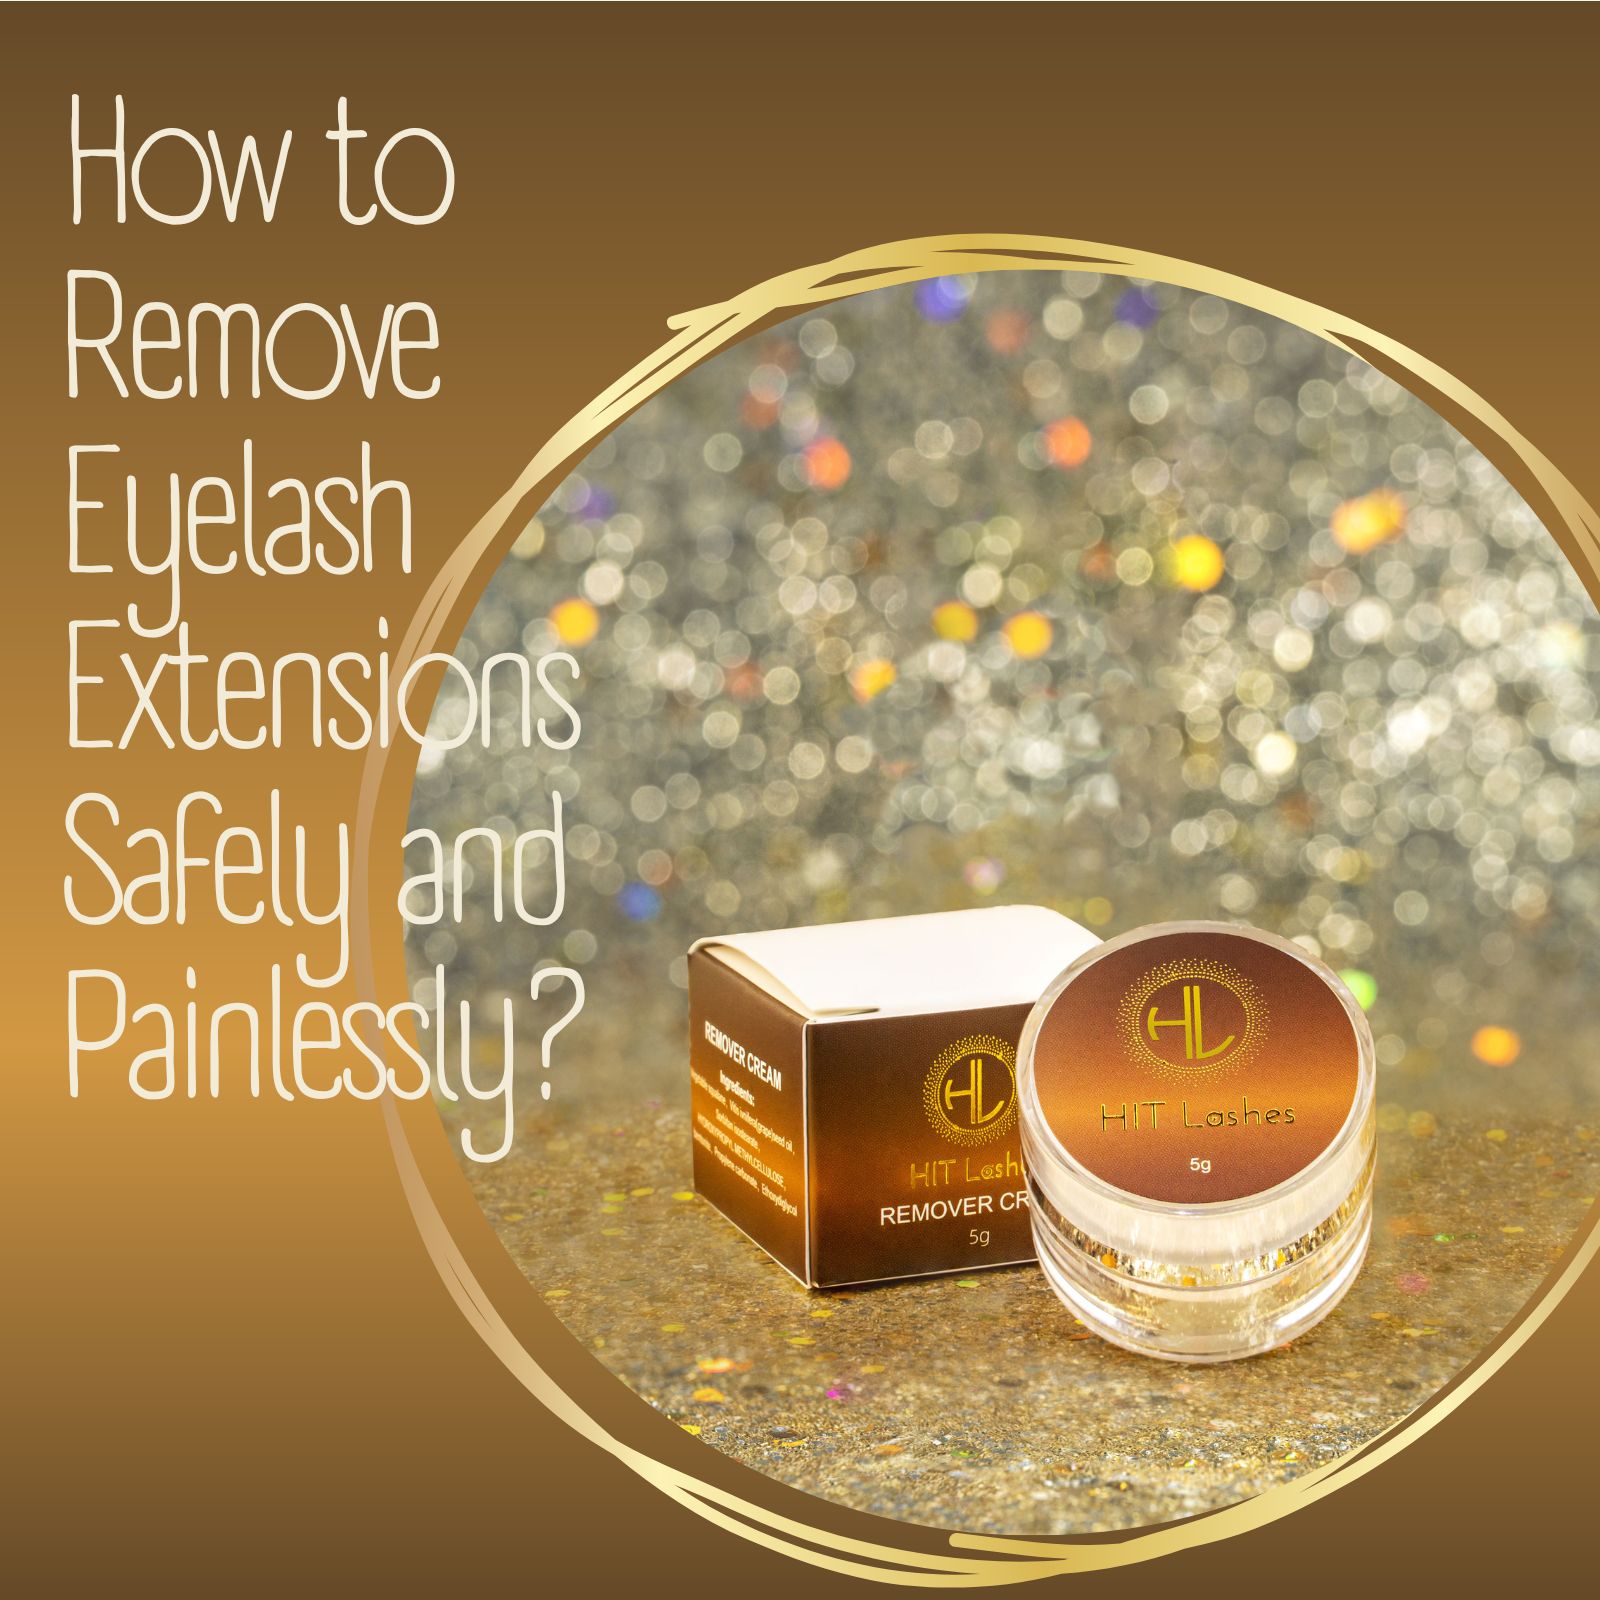 How to Remove Eyelash Extensions Safely and Painlessly